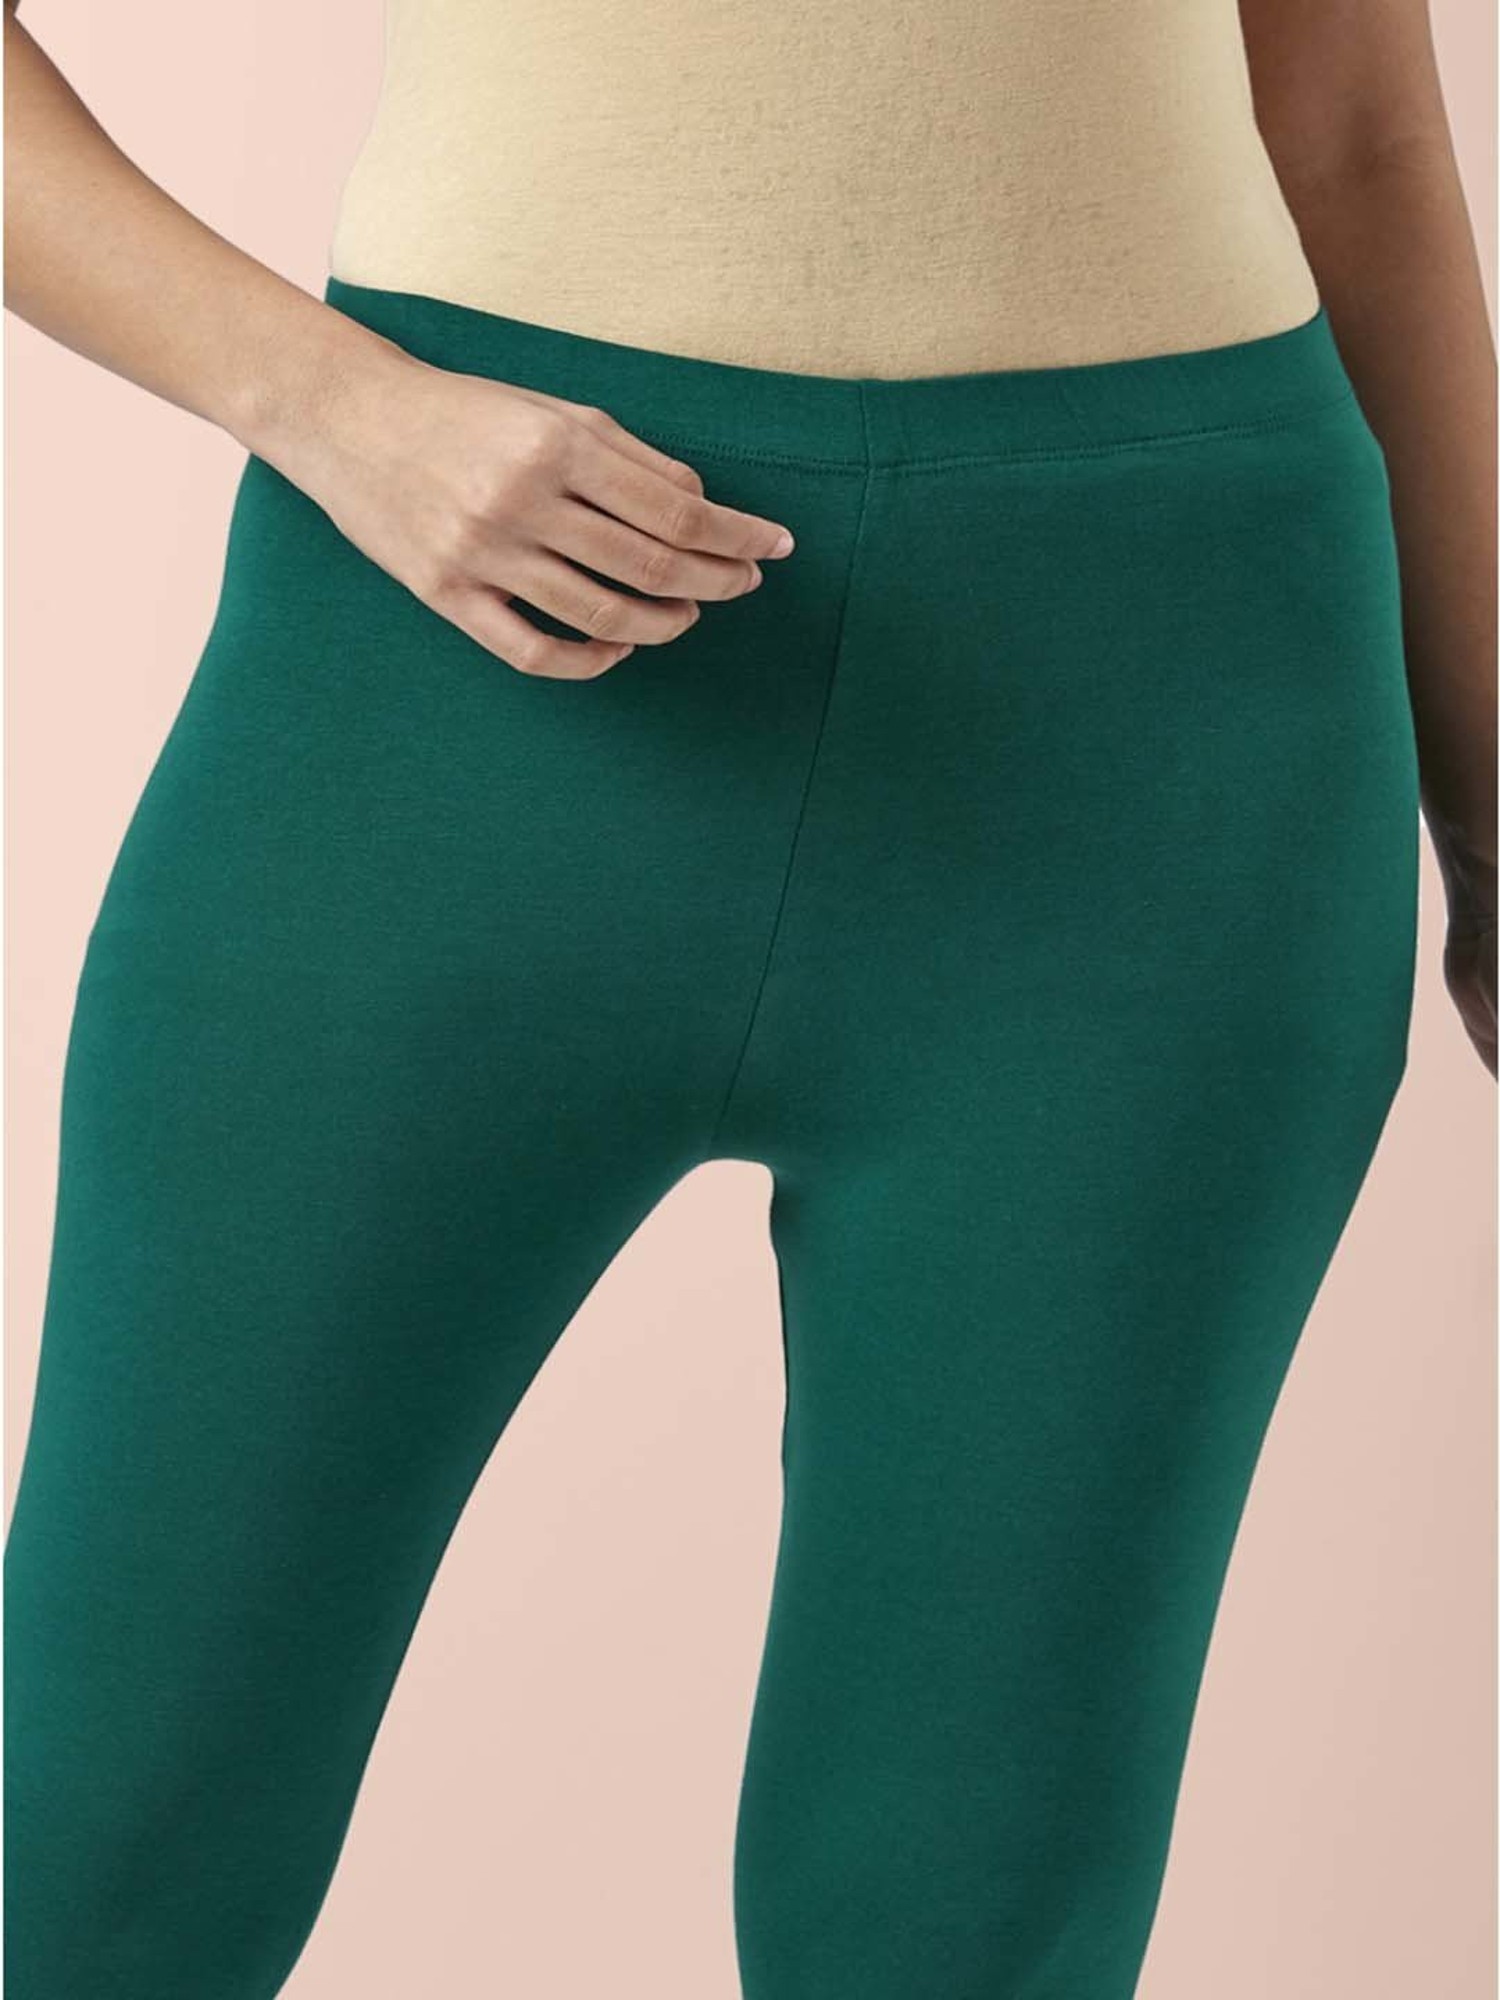 USA Pro Seamless Ribbed Leggings Forest Green, £11.00